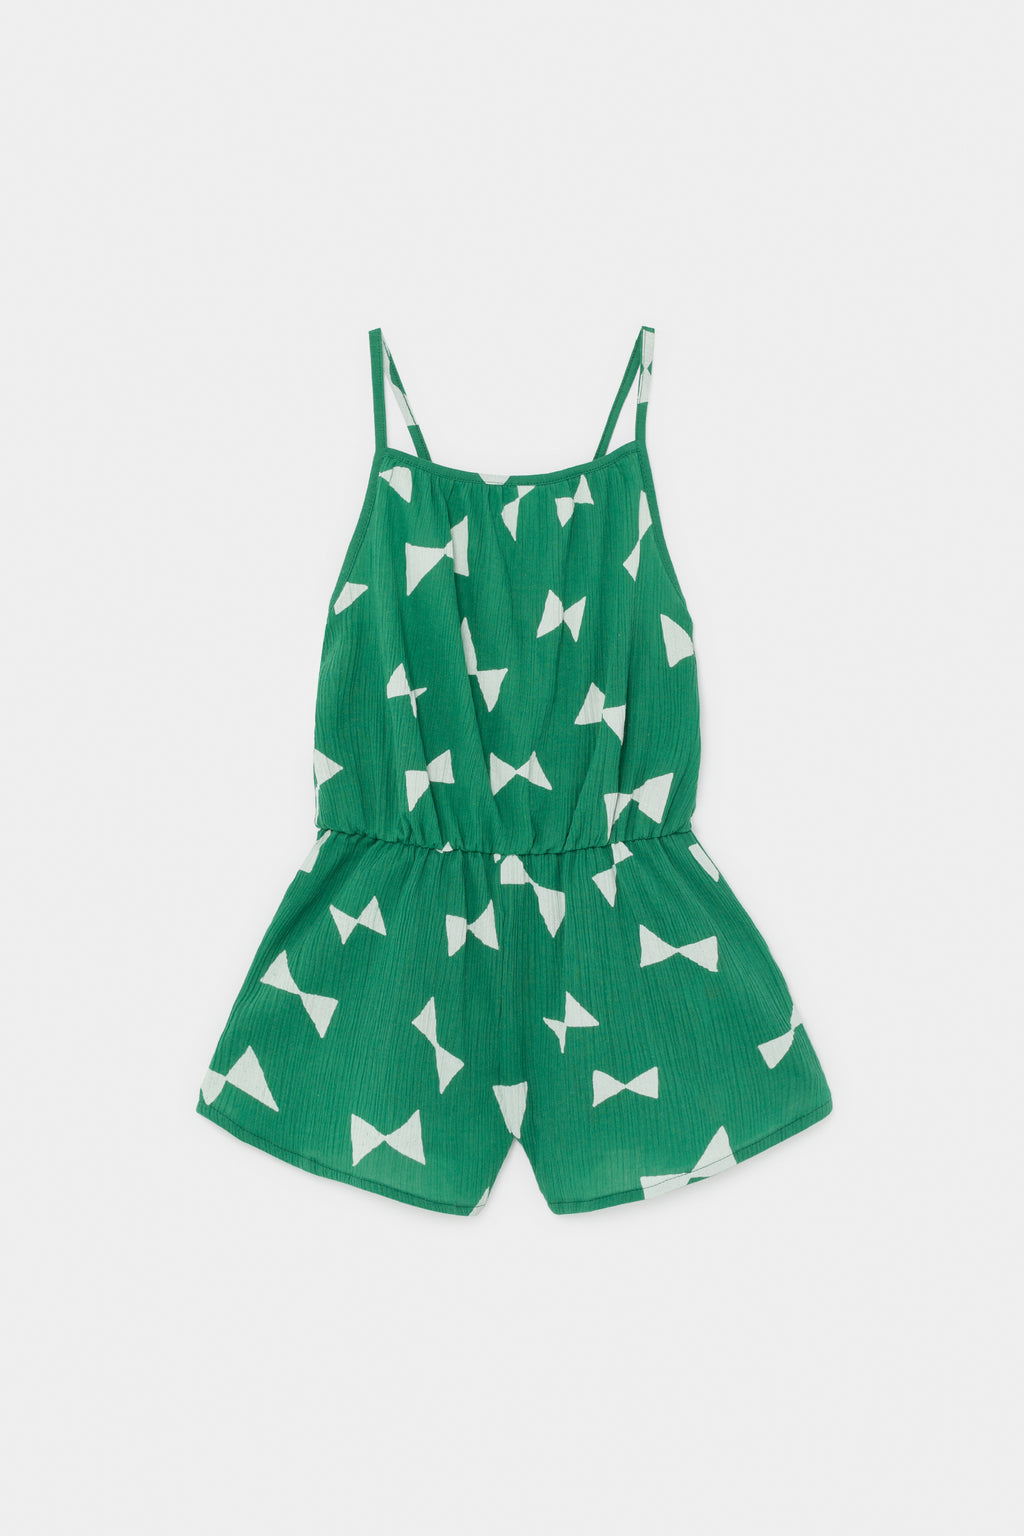 Bobo Choses All Over Bow Playsuit